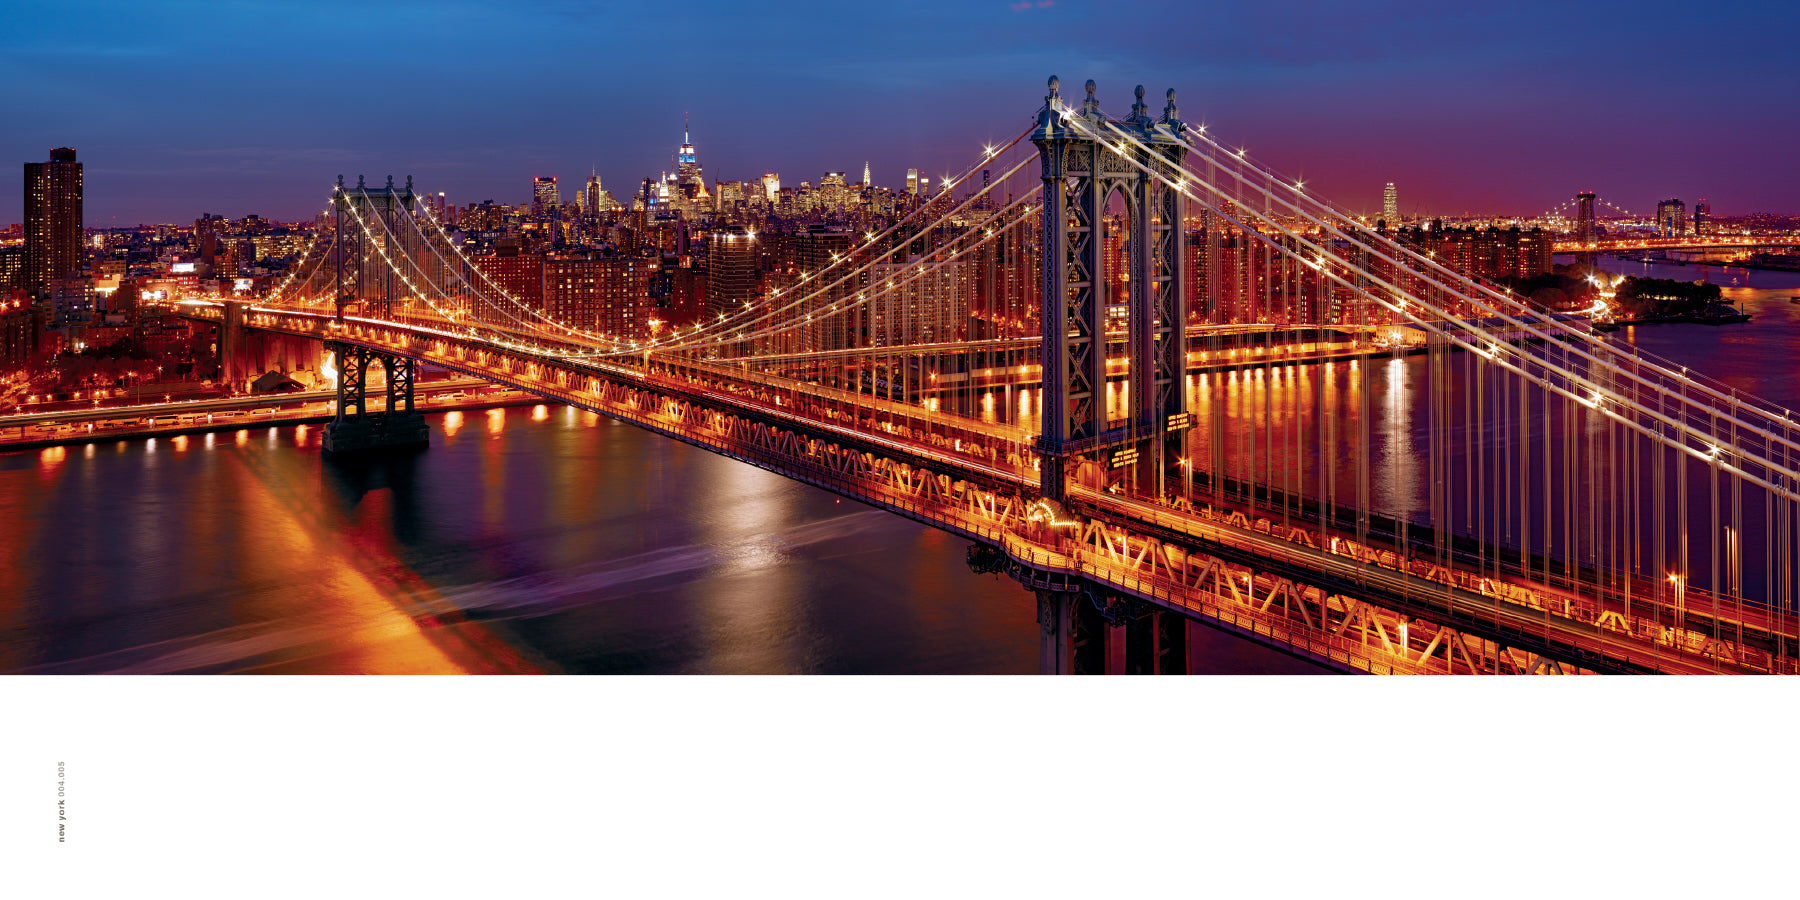 Photo of New York City and bridge after sunset by Peter Lik